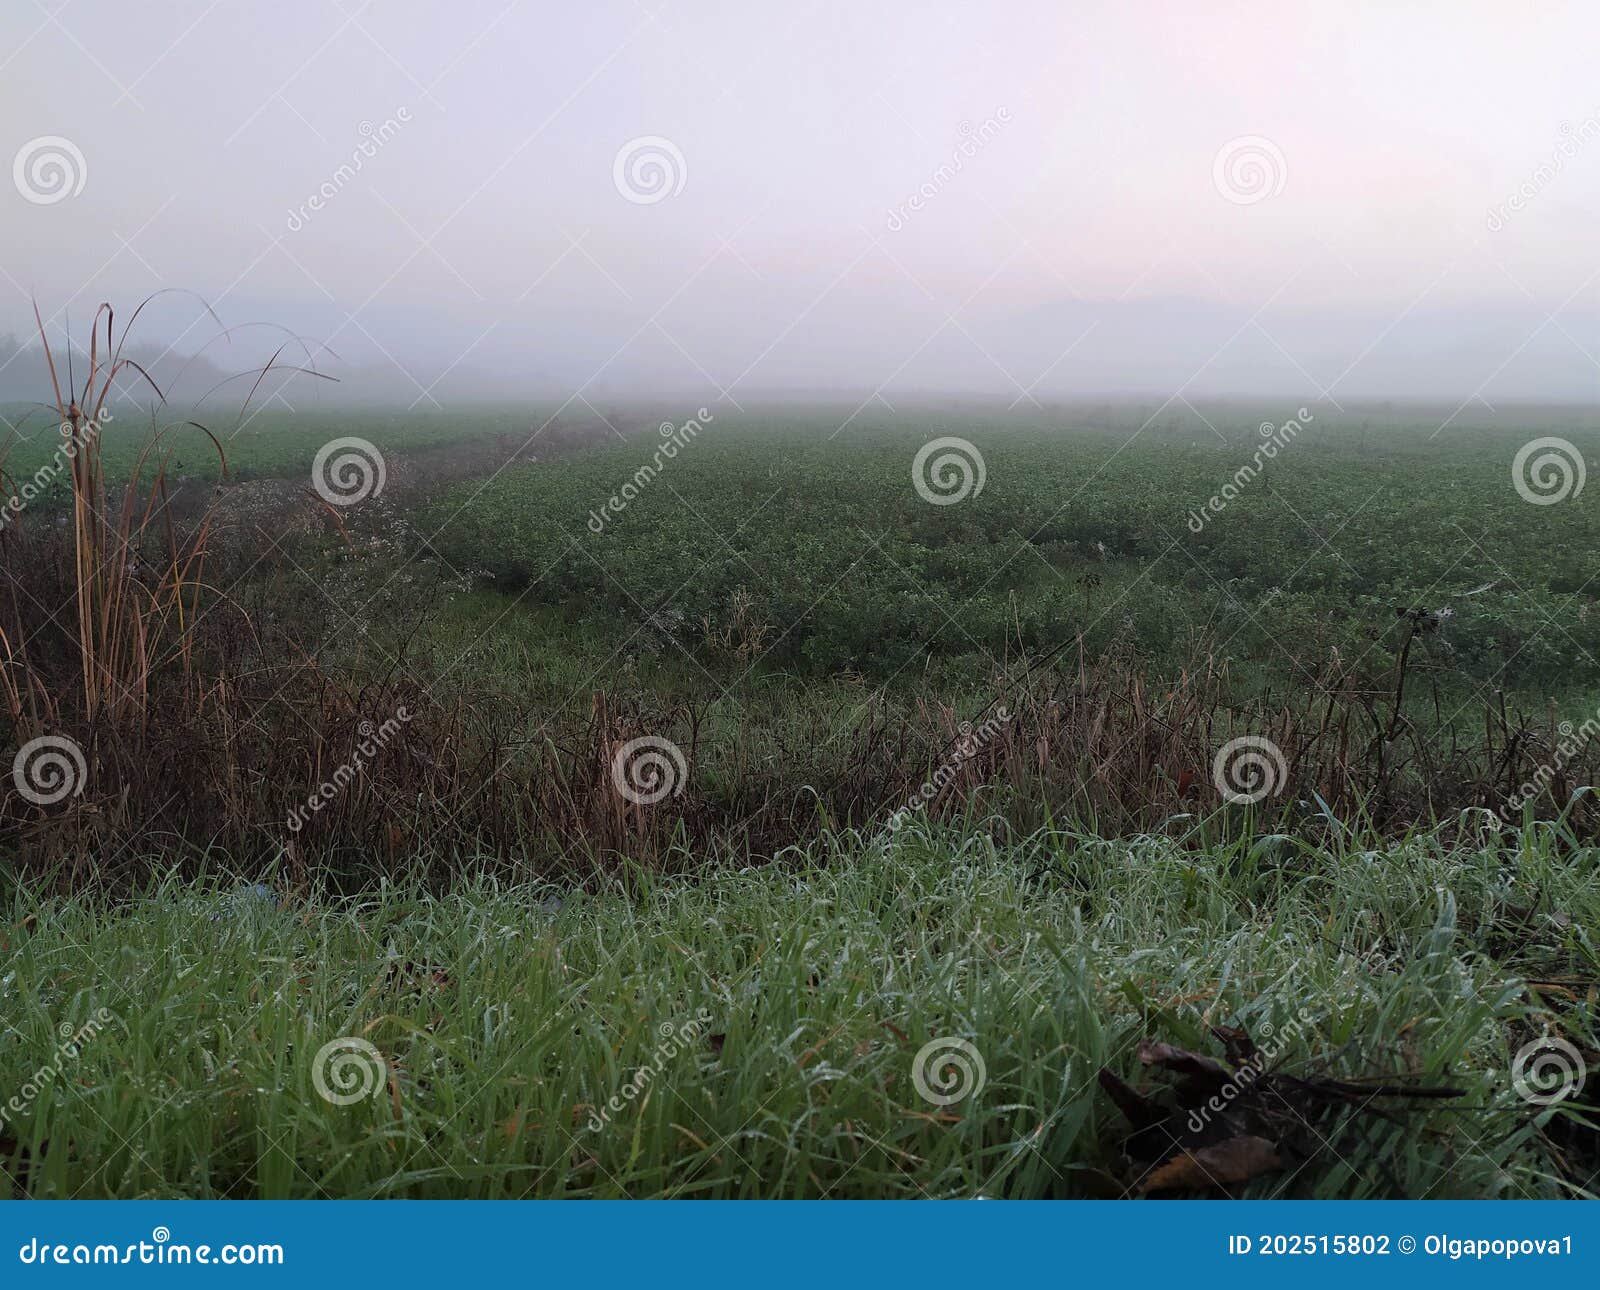 agricultura field in autumn, fog in the field, view.